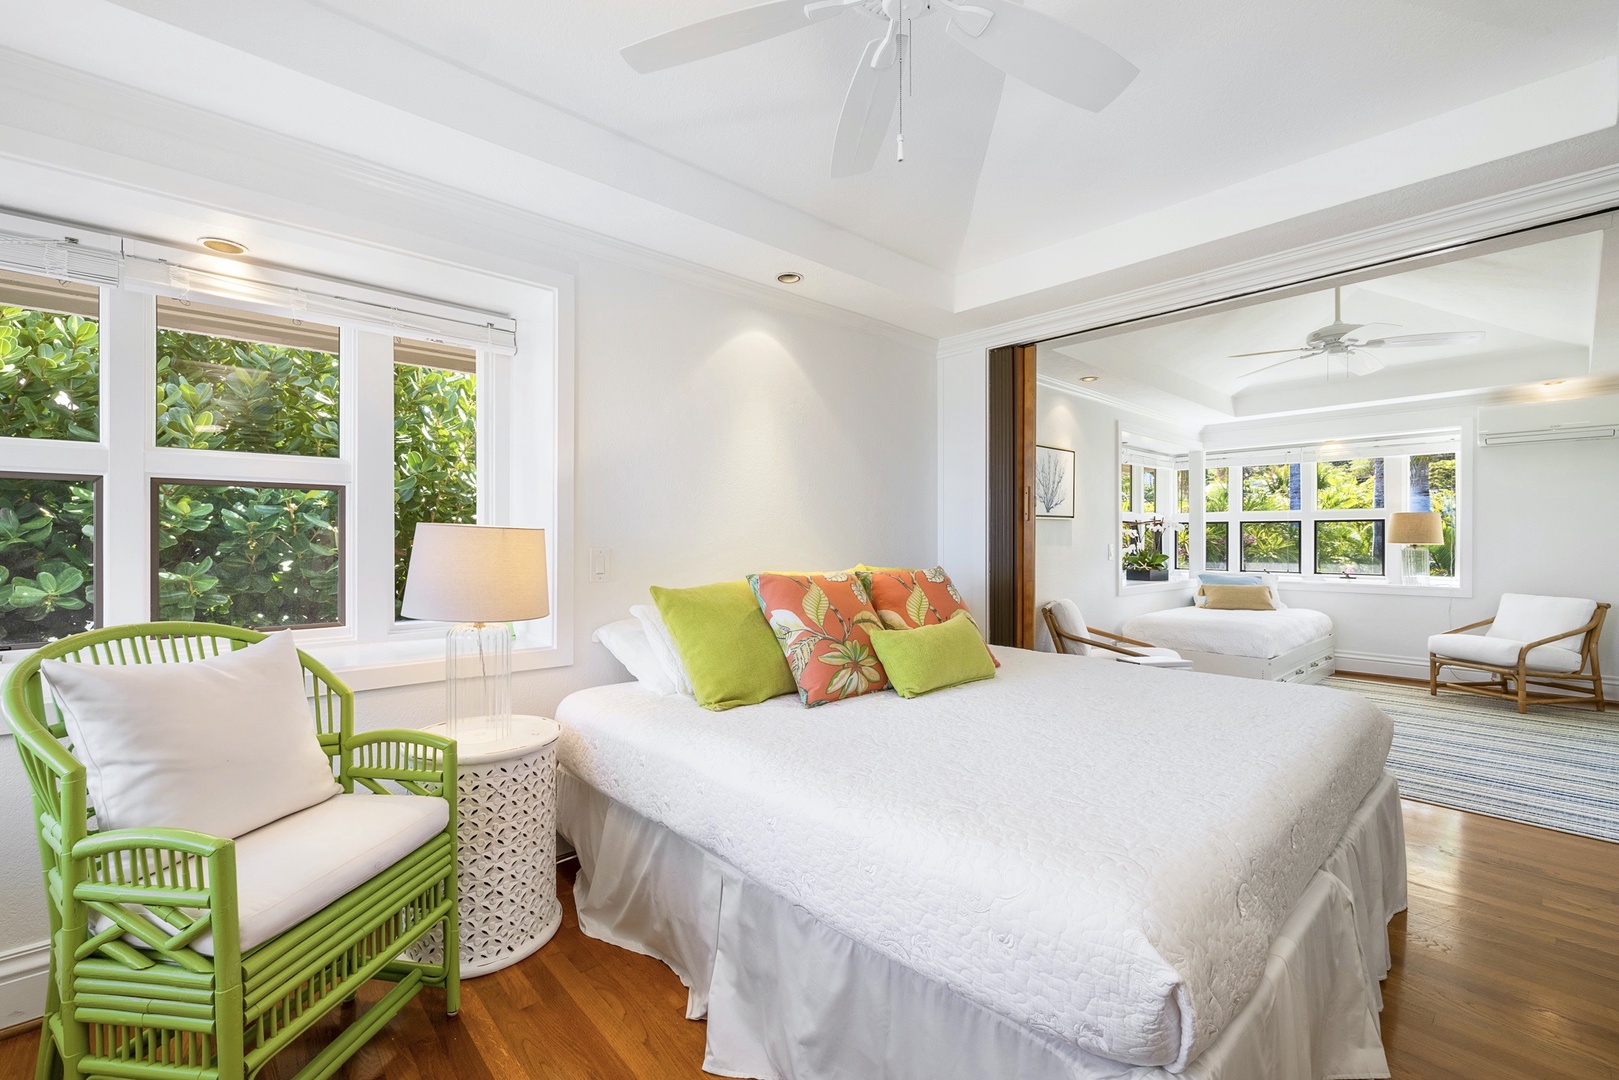 Kailua Vacation Rentals, Lanikai Seashore - This bedroom connects to the upstairs den